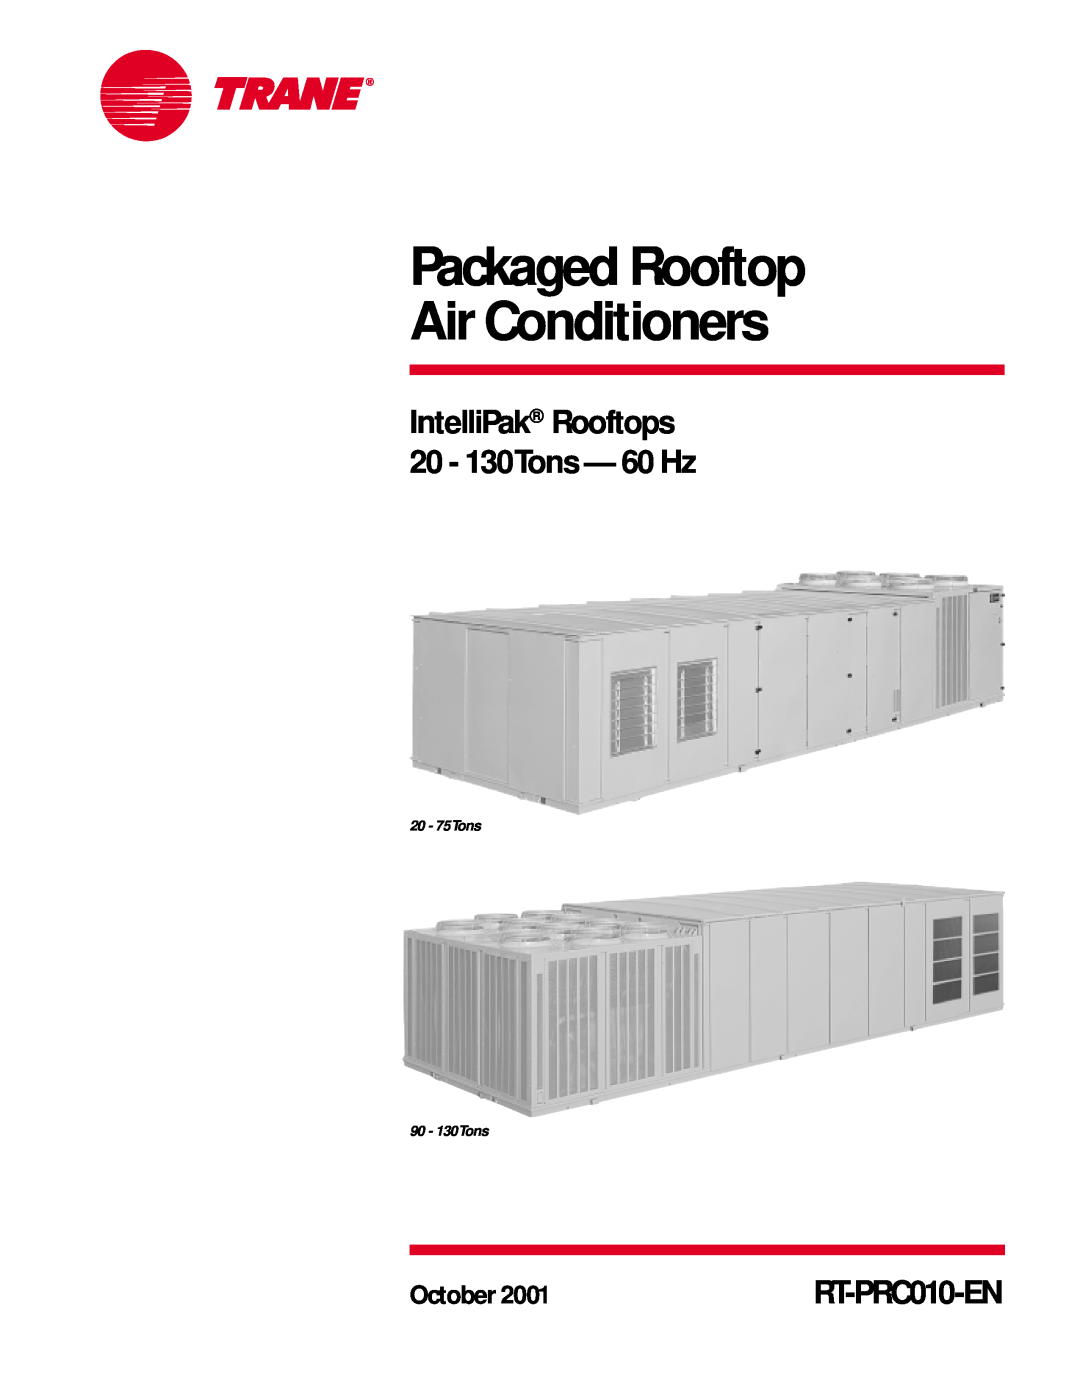 Trane RT-PRC010-EN manual Packaged Rooftop Air Conditioners, IntelliPak Rooftops 20 - 130Tons - 60 Hz, October 